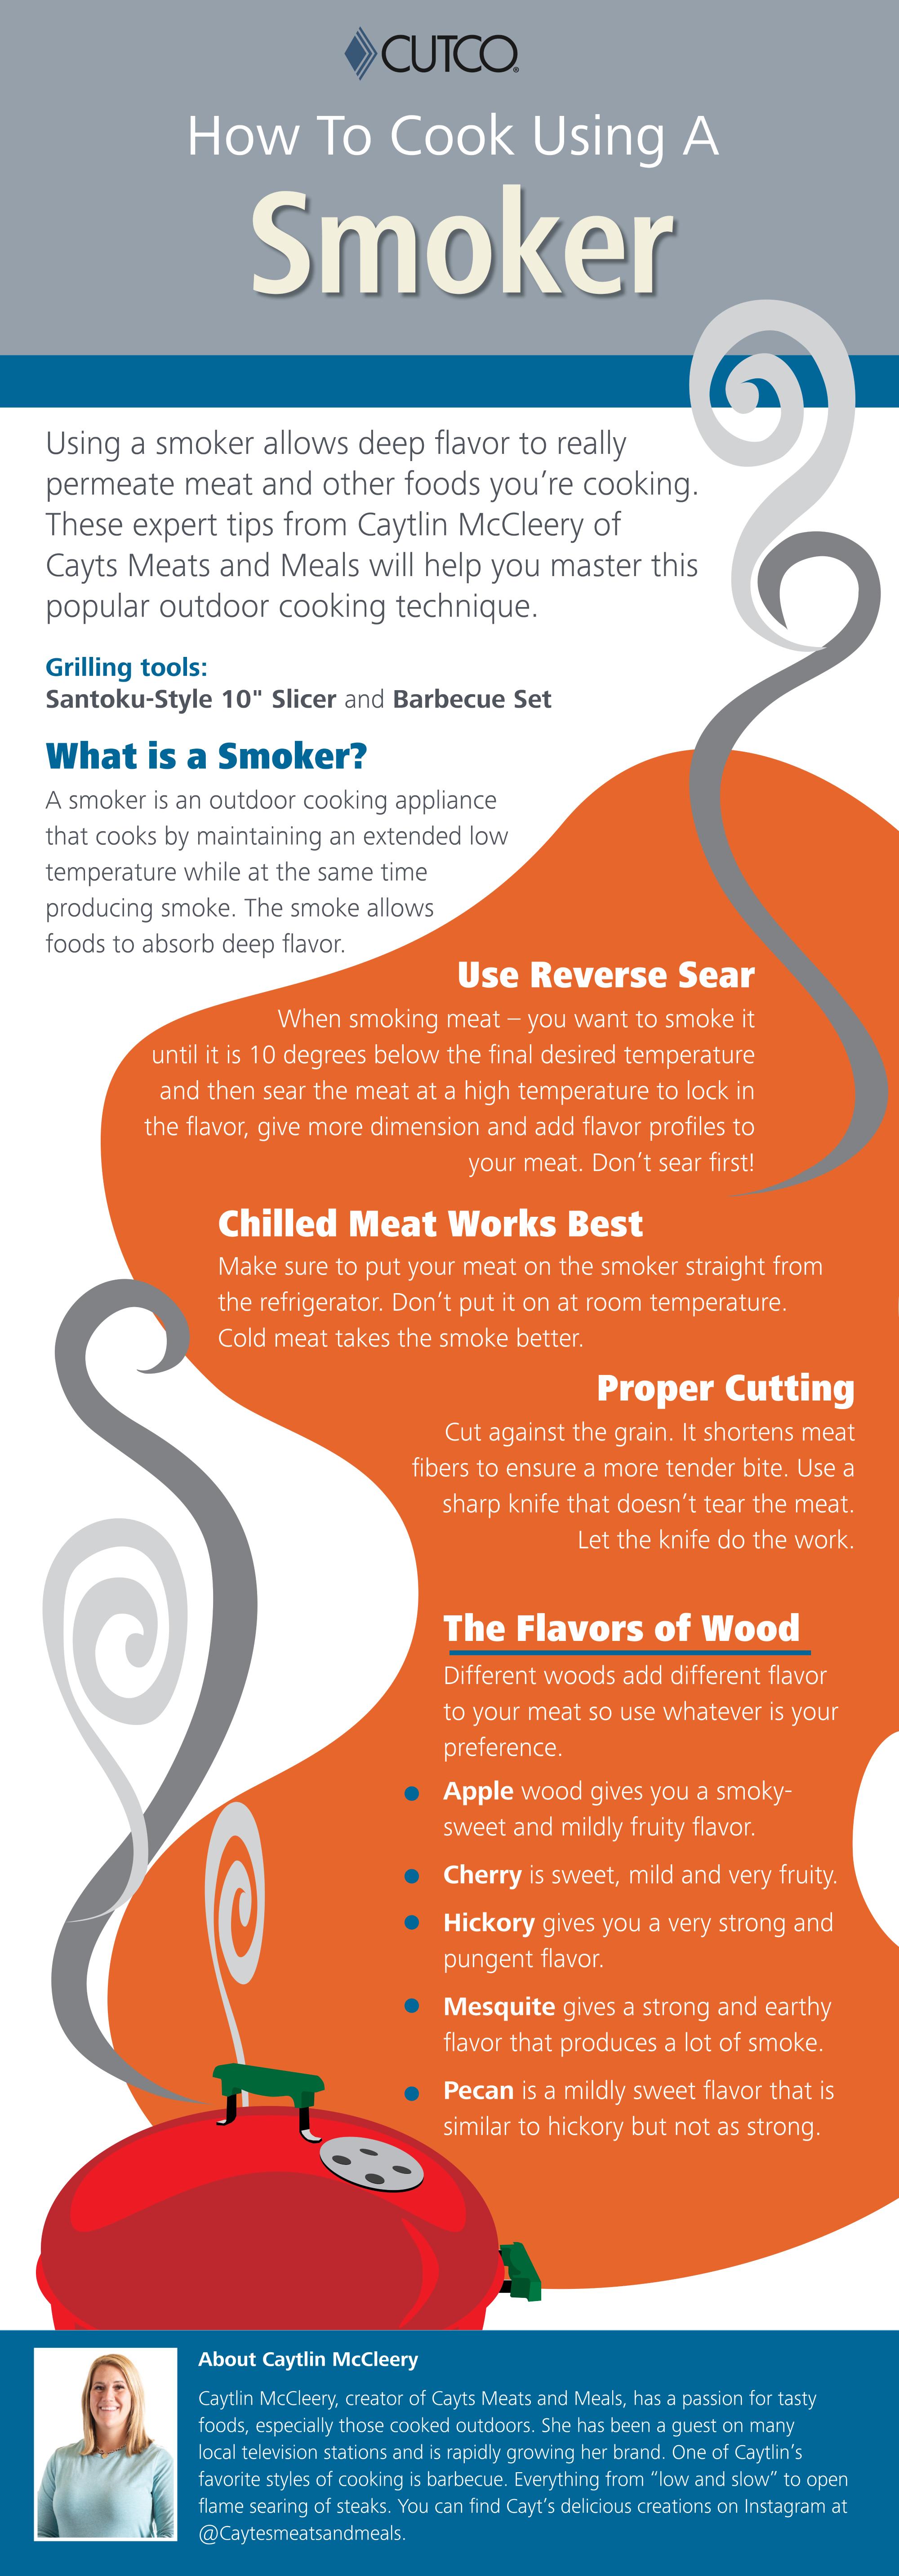 How to cook using a smoker infographic.